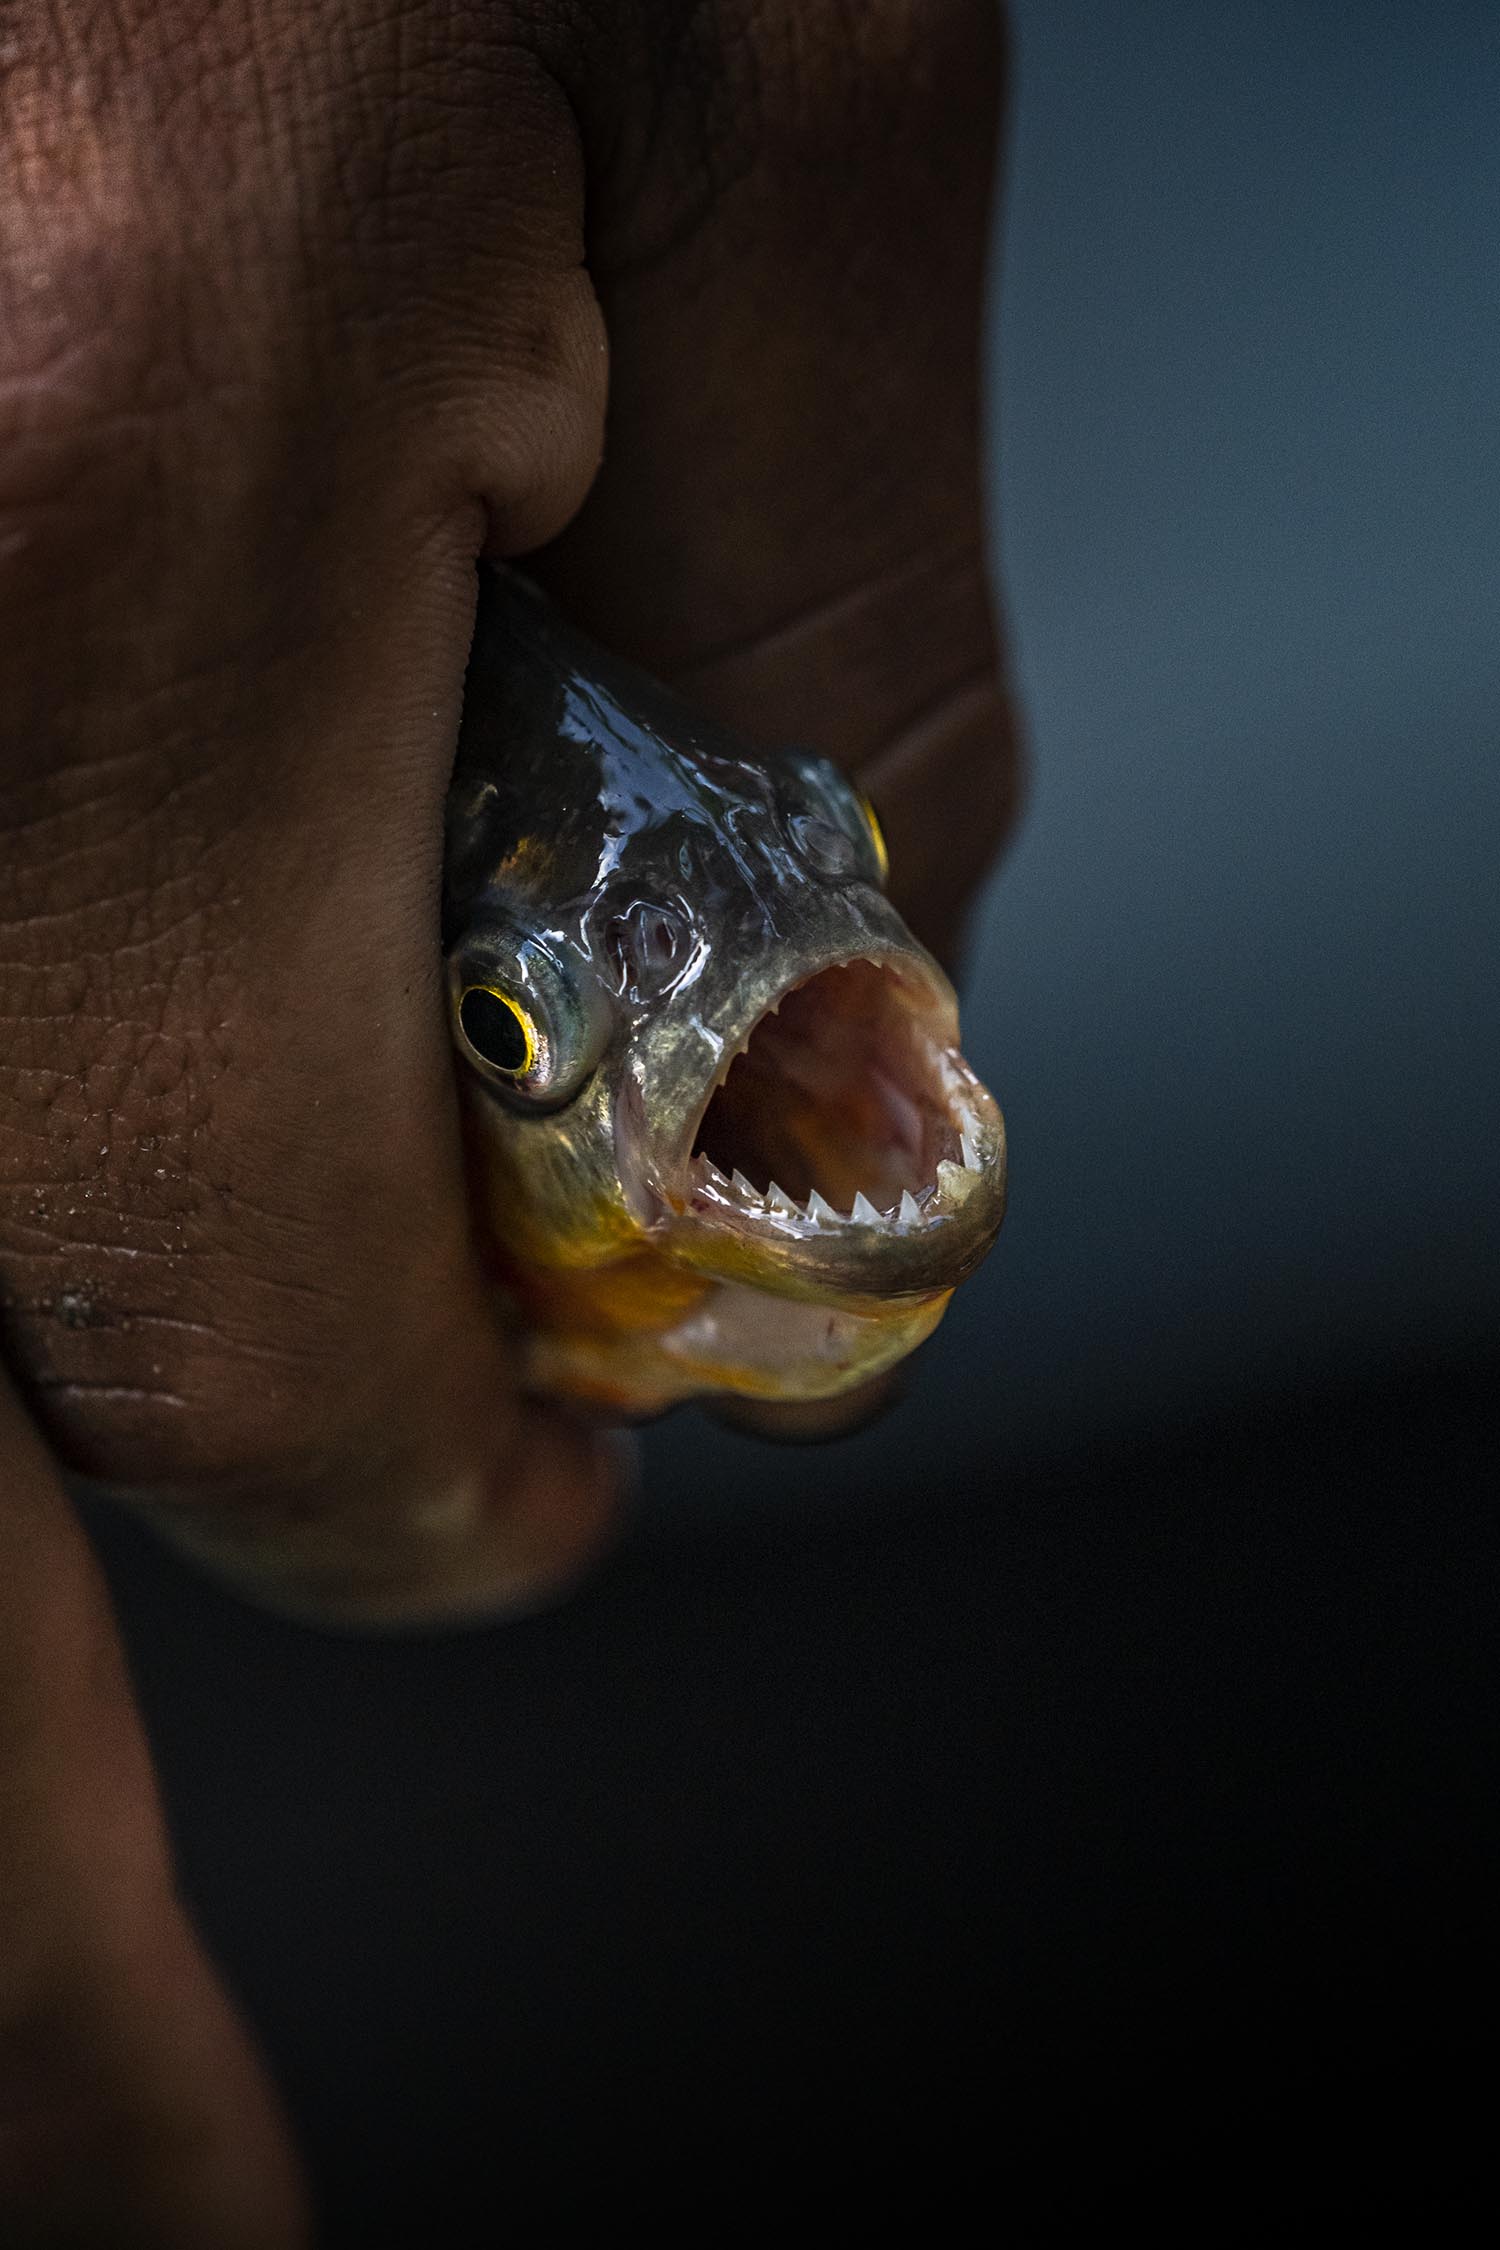 A small fish with mouth agape, tiny saw-like teeth line its lower jaw